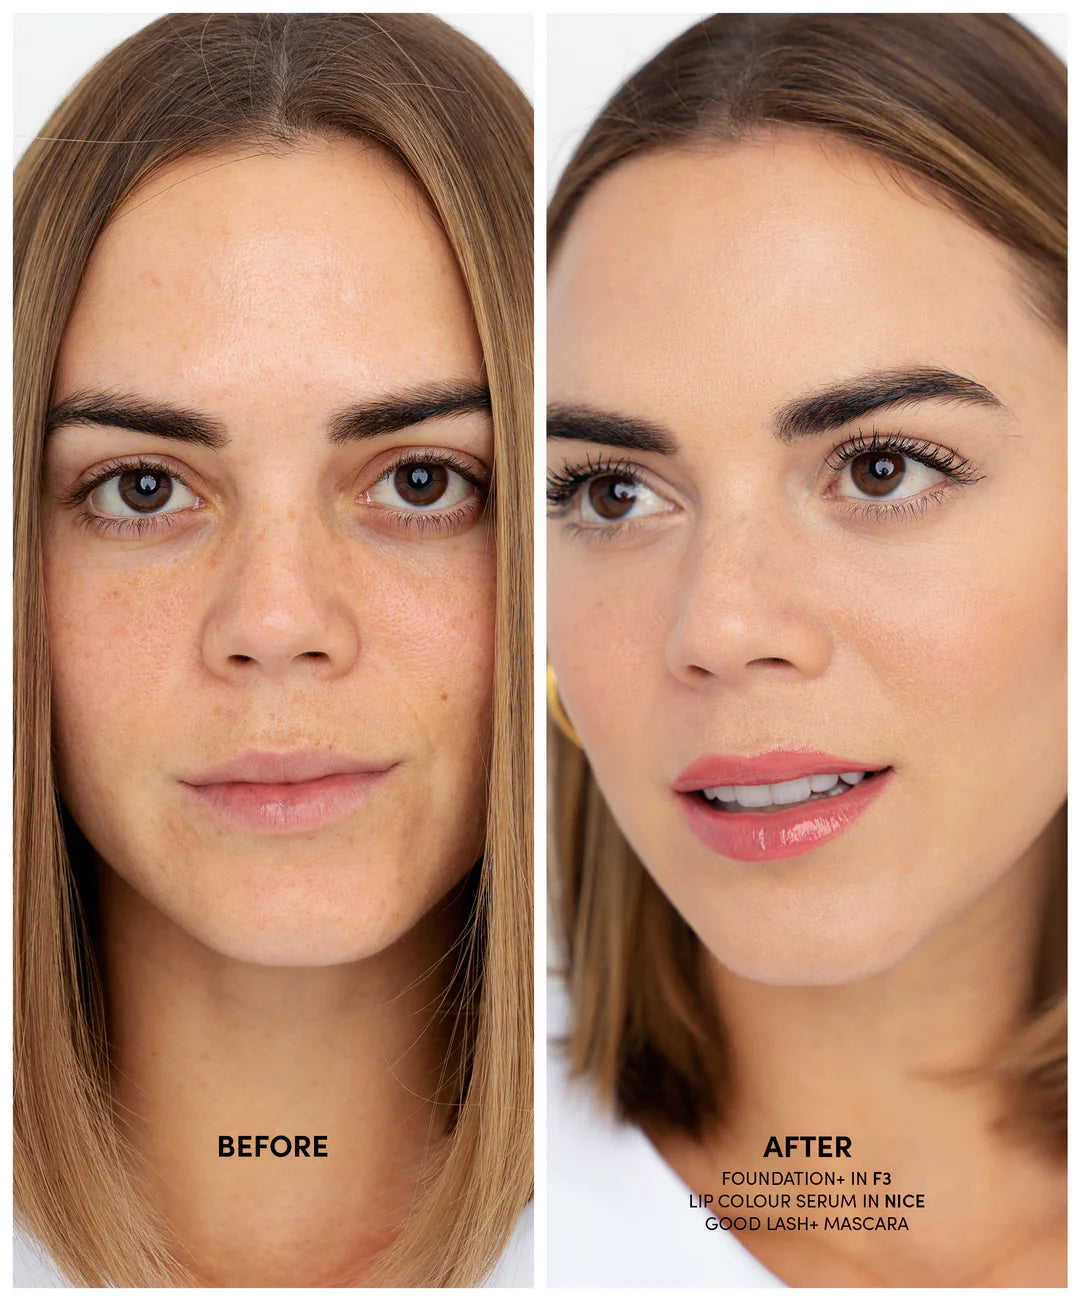 Foundation+ Herbal Hyaluronic and Vitamin C Photo-Filter Foundation